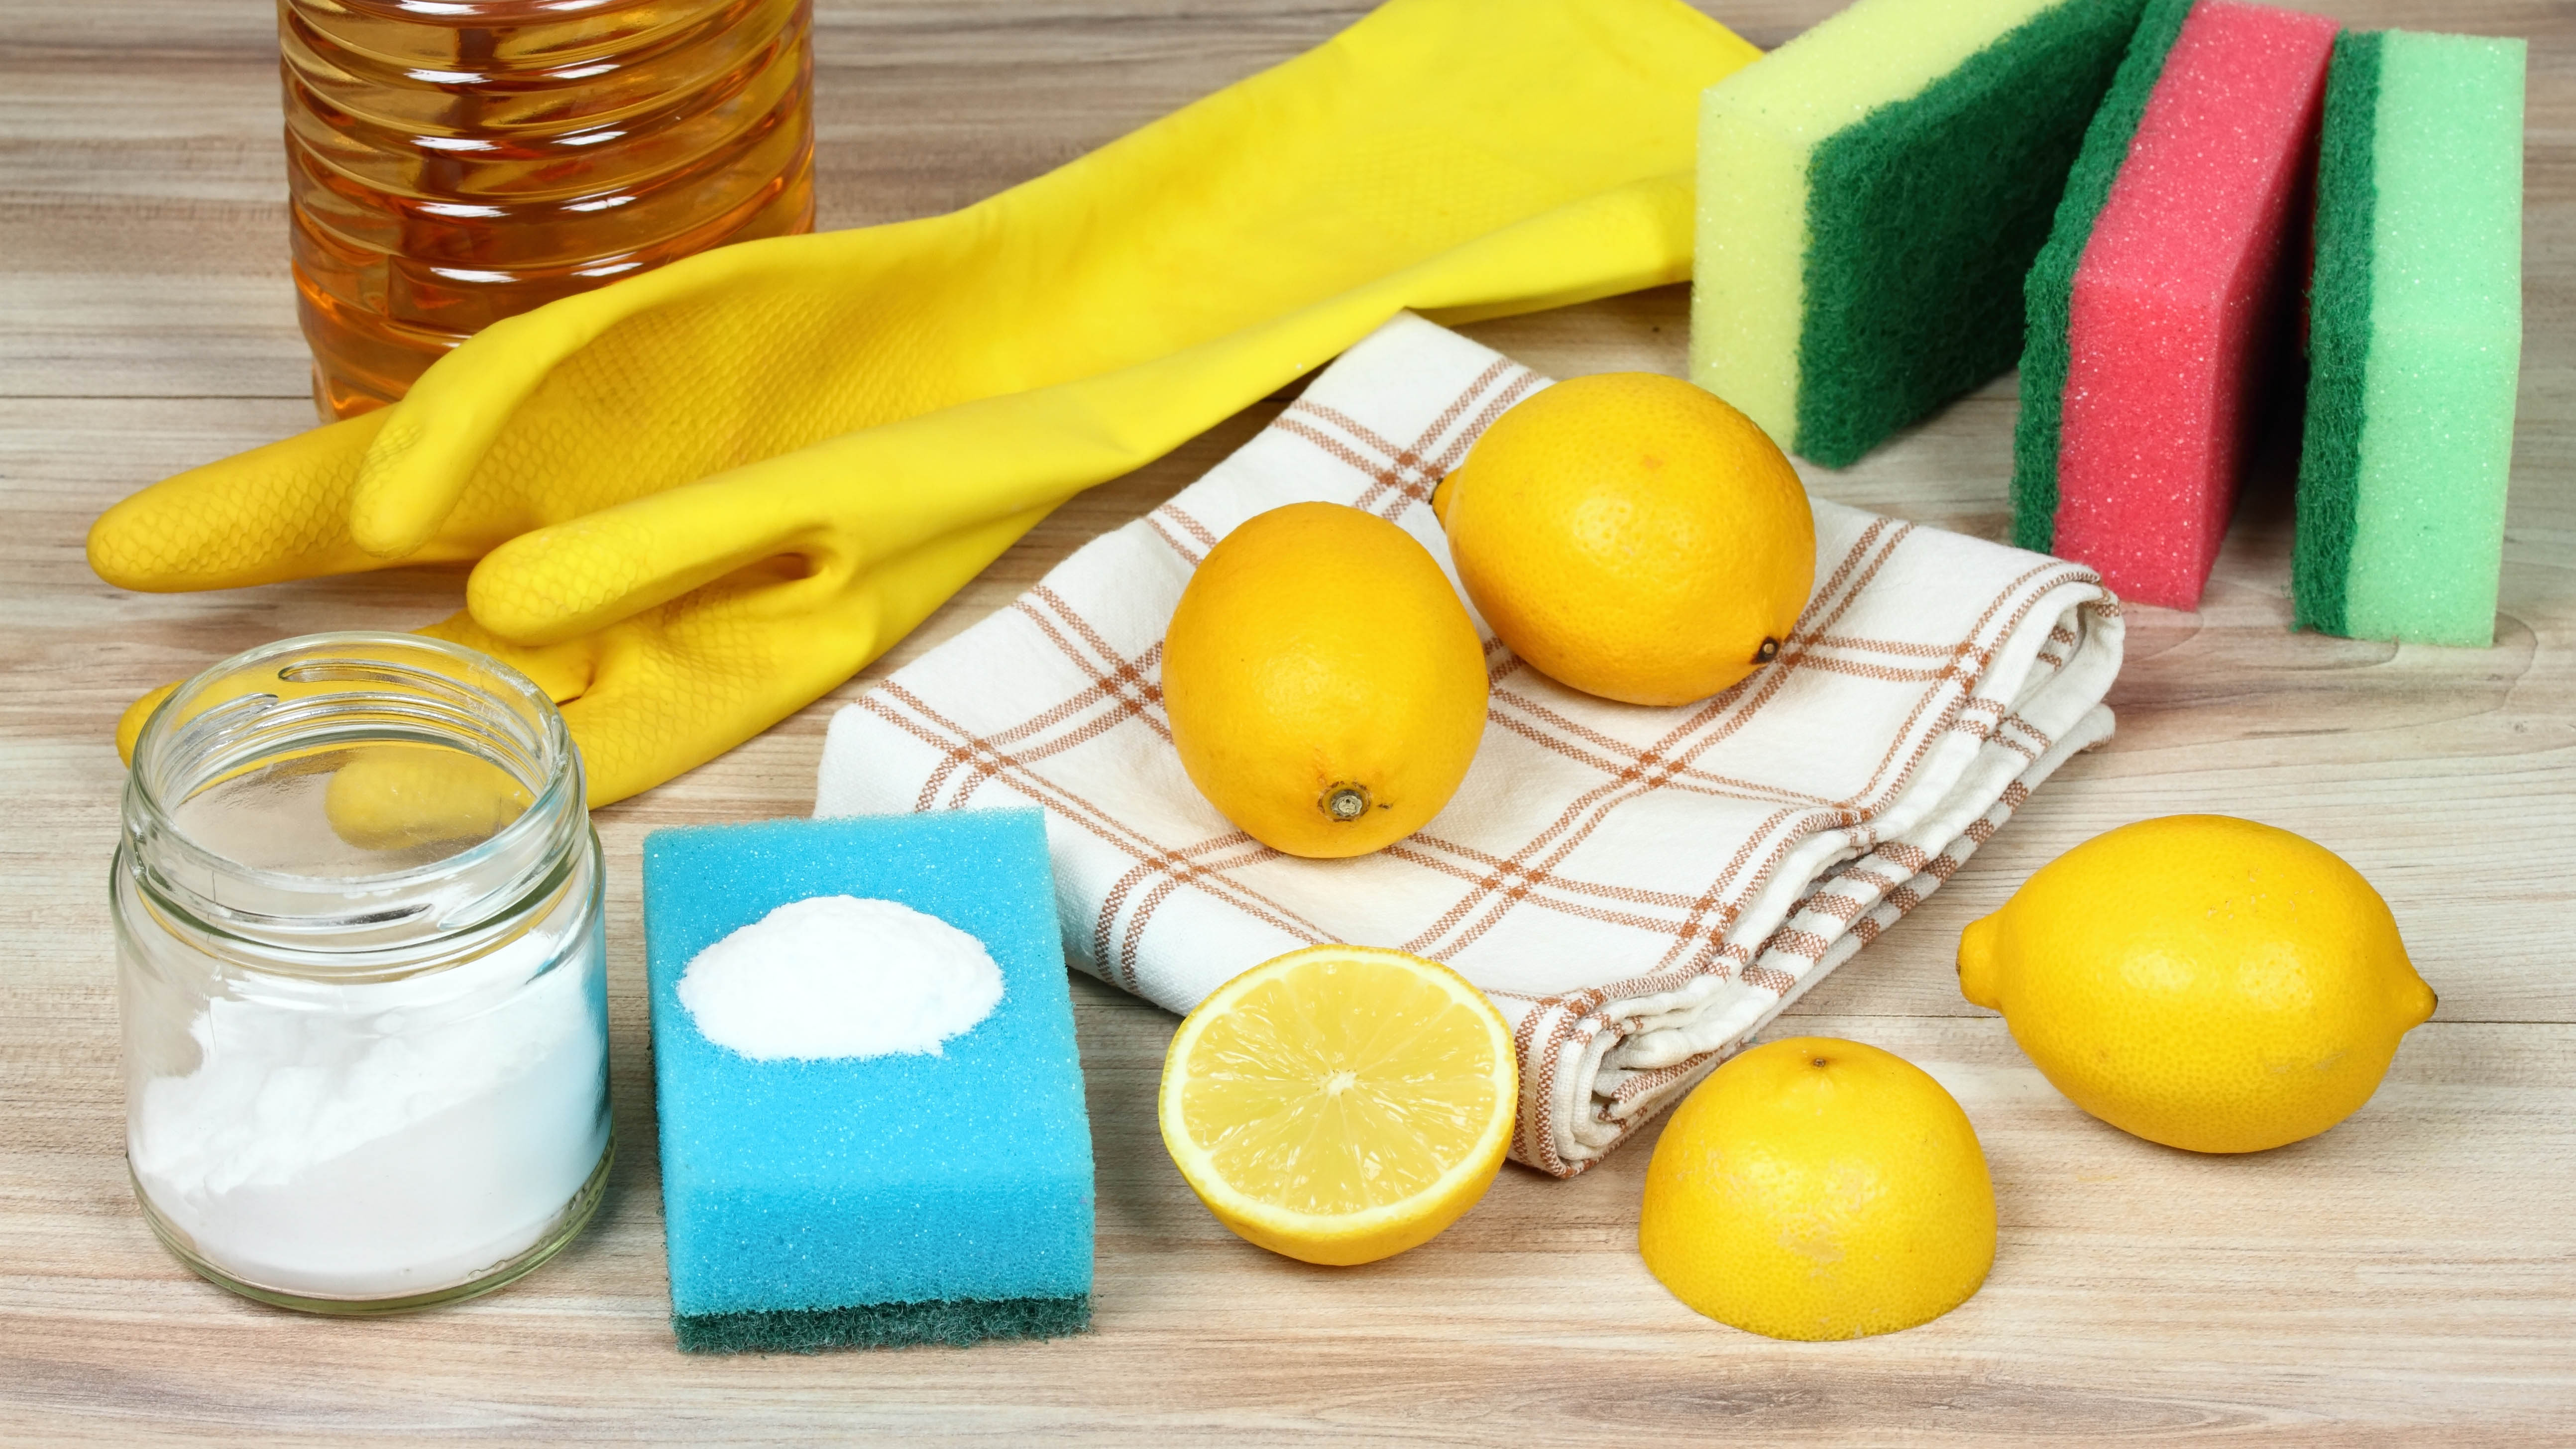 9 things you didn't know you could clean with a lemon | Tom's Guide